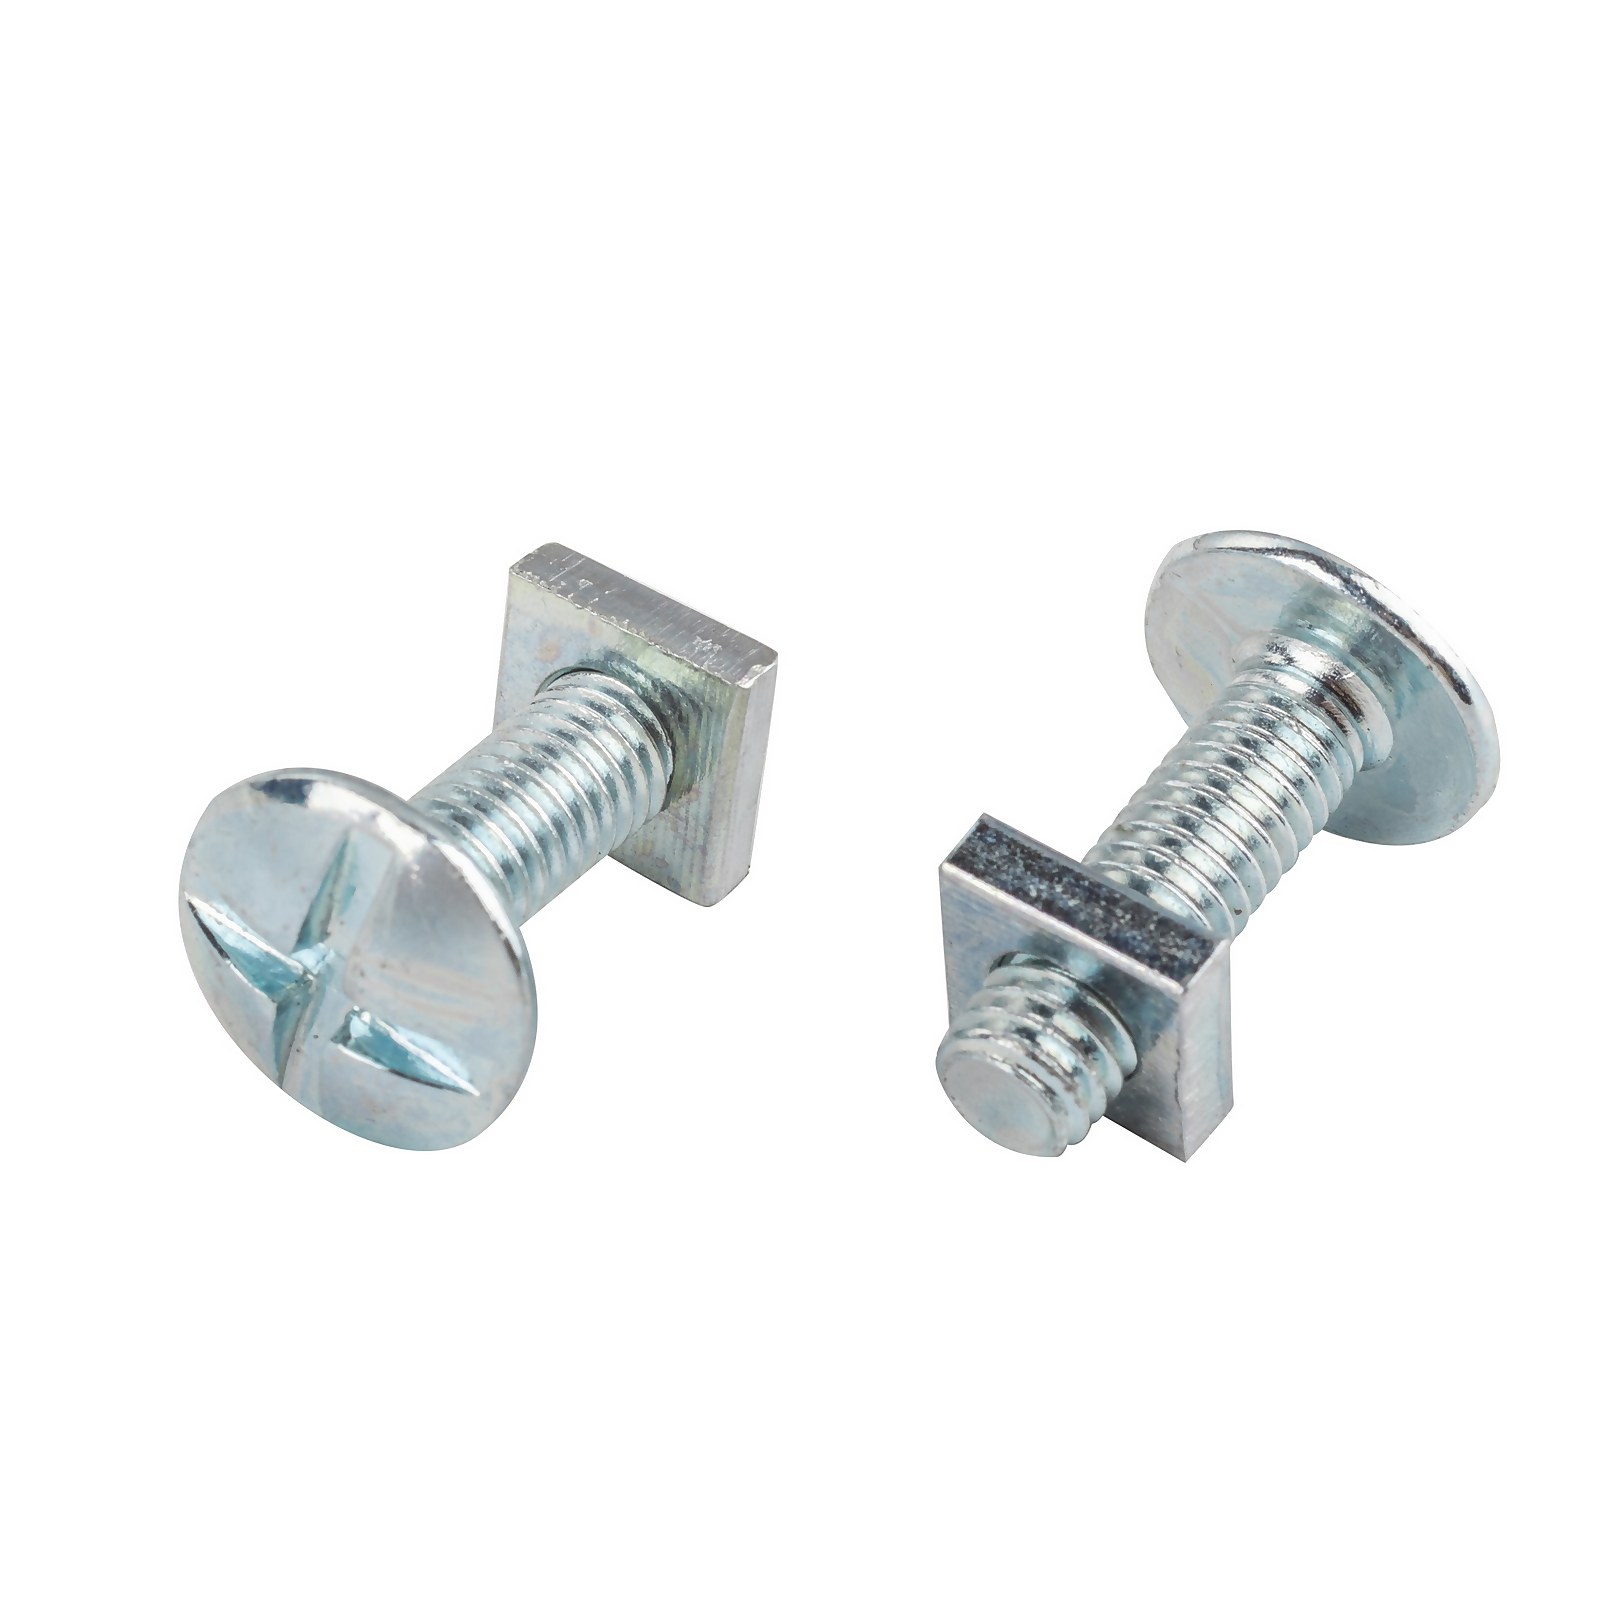 Photo of Homebase Zinc Plated Roof Bolt M5 20mm 10 Pack